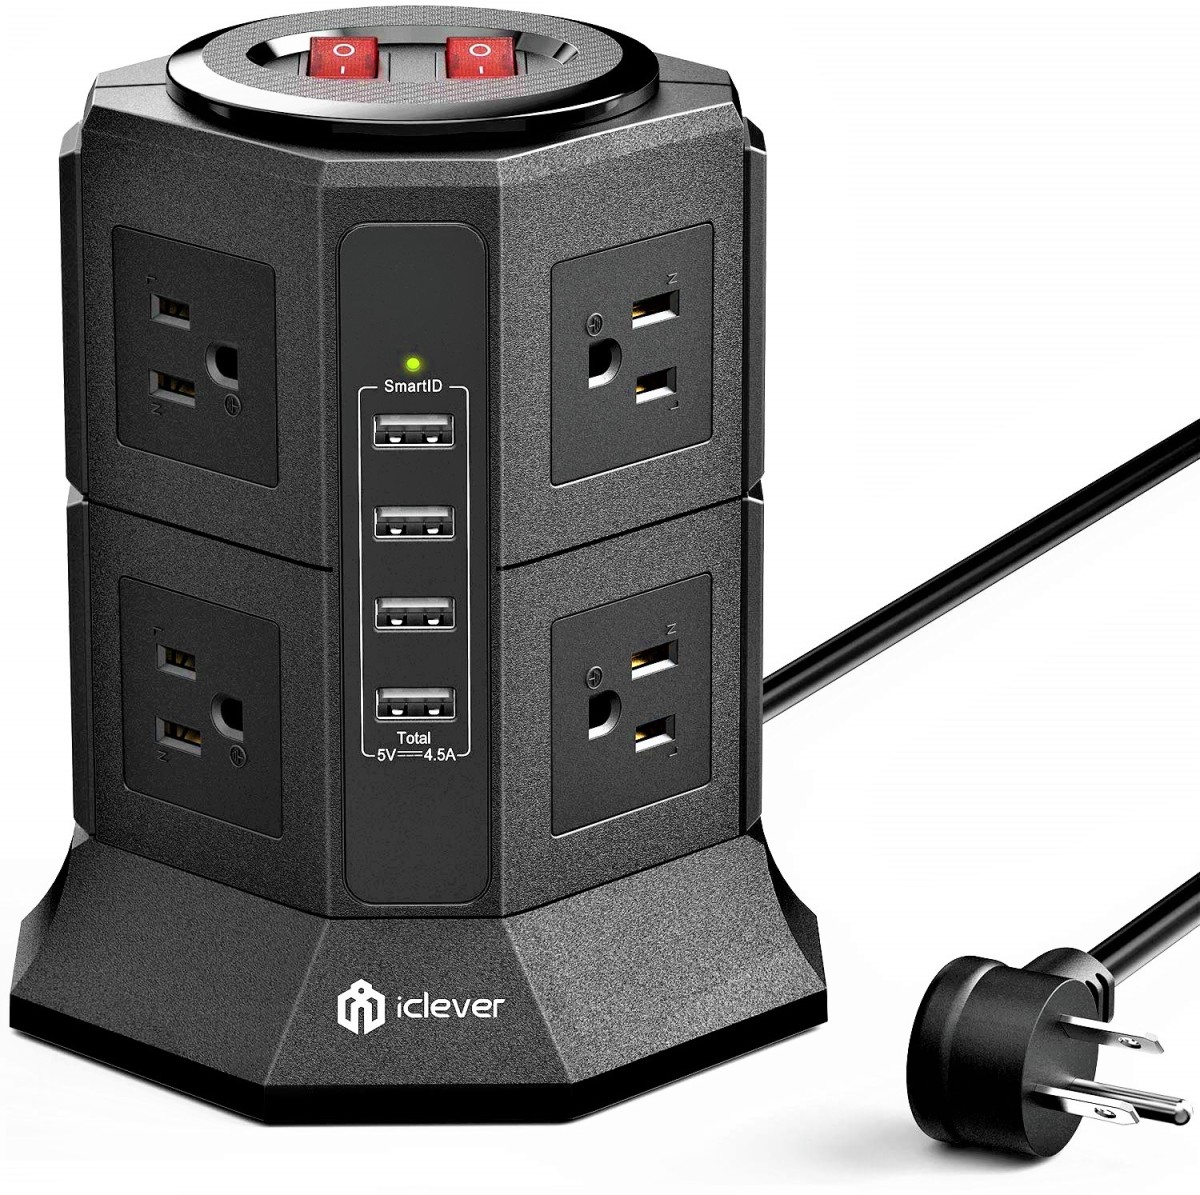 iClever Power Strip Tower Review: The Ultimate Desktop Charging Station